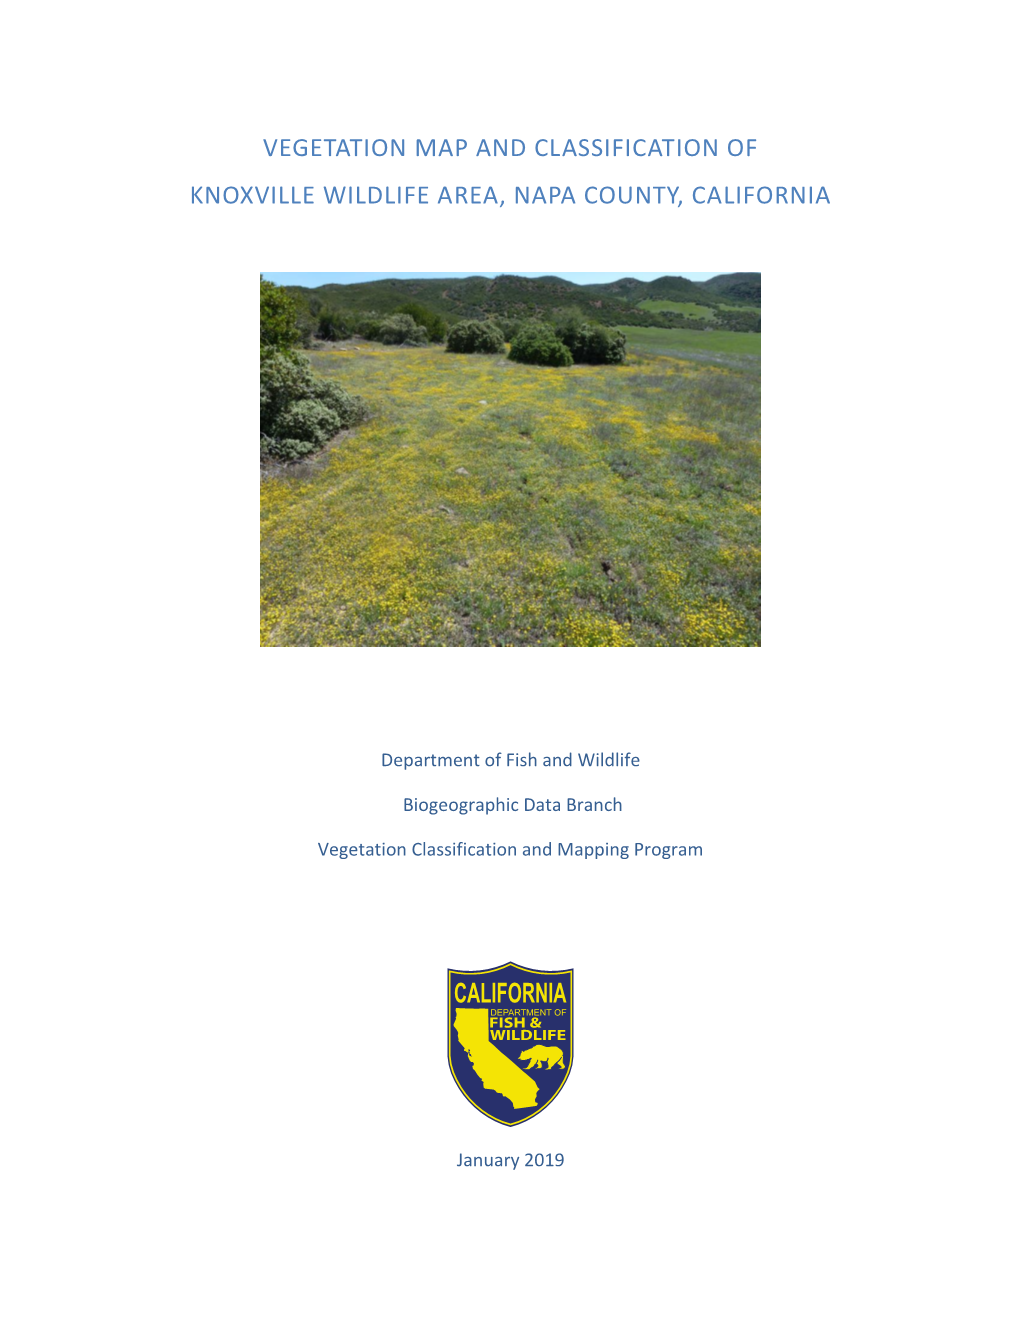 Vegetation Map and Classification of Knoxville Wildlife Area, Napa County, California